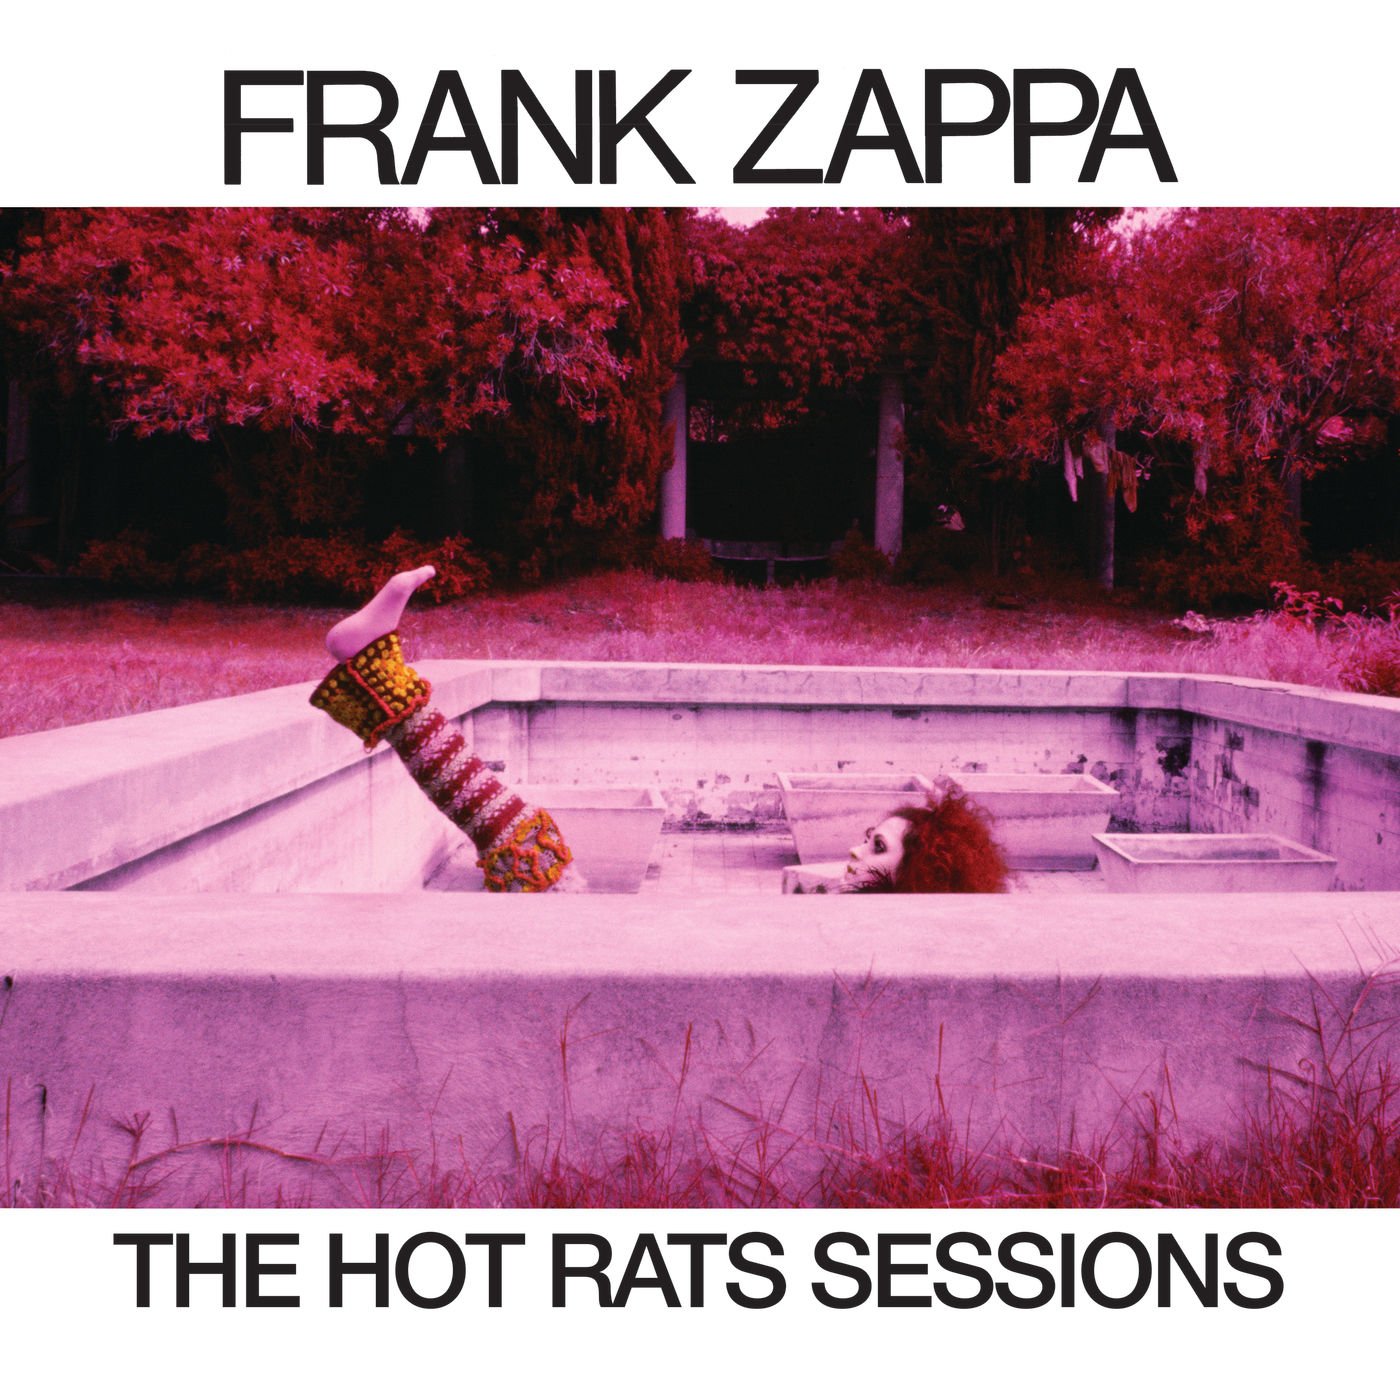 Frank Zappa - The Hot Rats Sessions (2019) FLAC Download